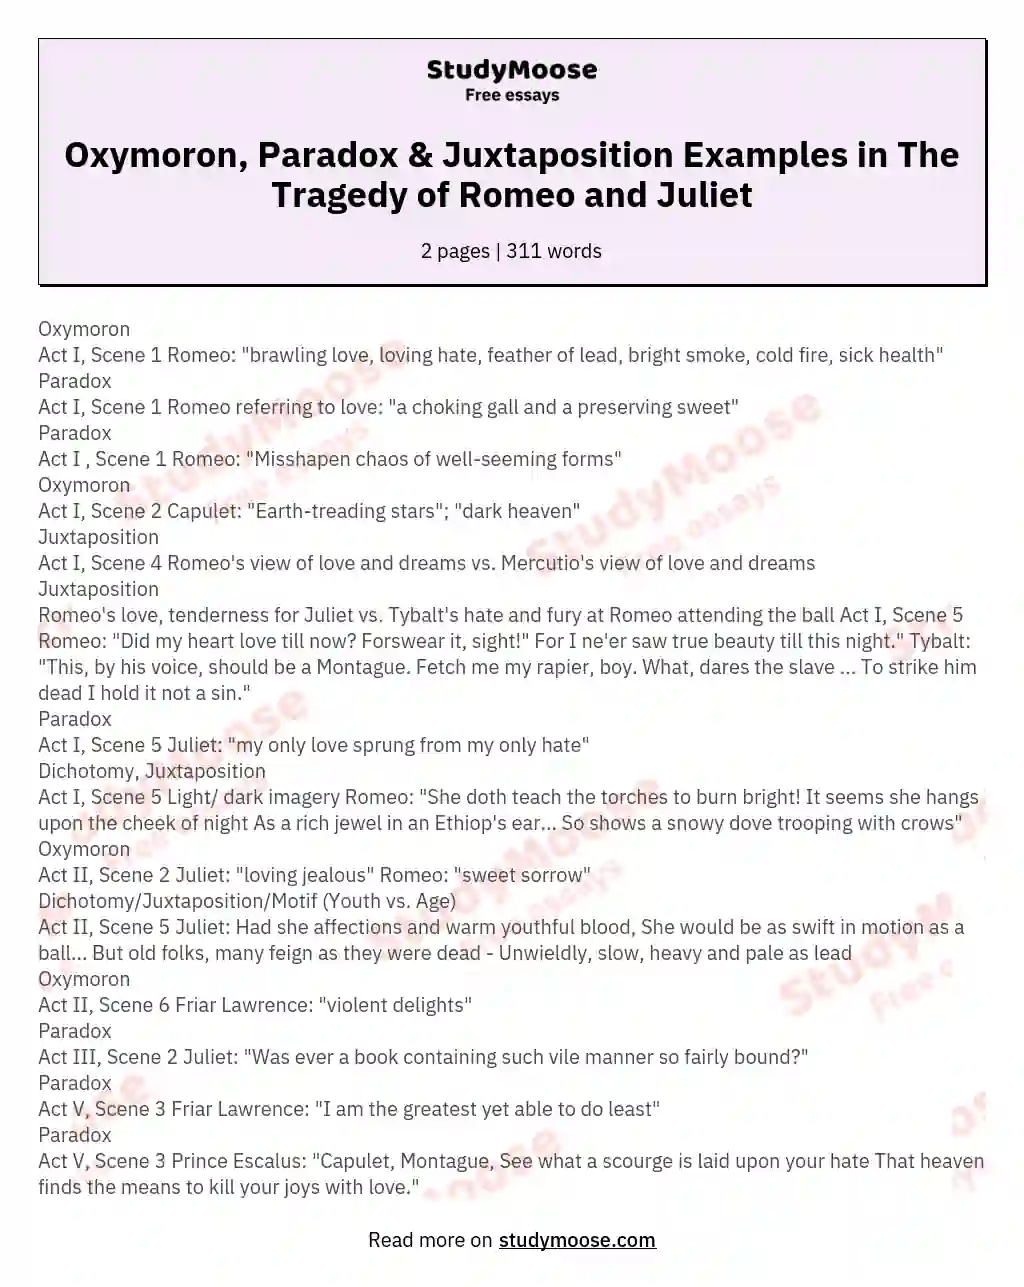 Oxymoron, Paradox &amp; Juxtaposition Examples in The Tragedy of Romeo and Juliet essay